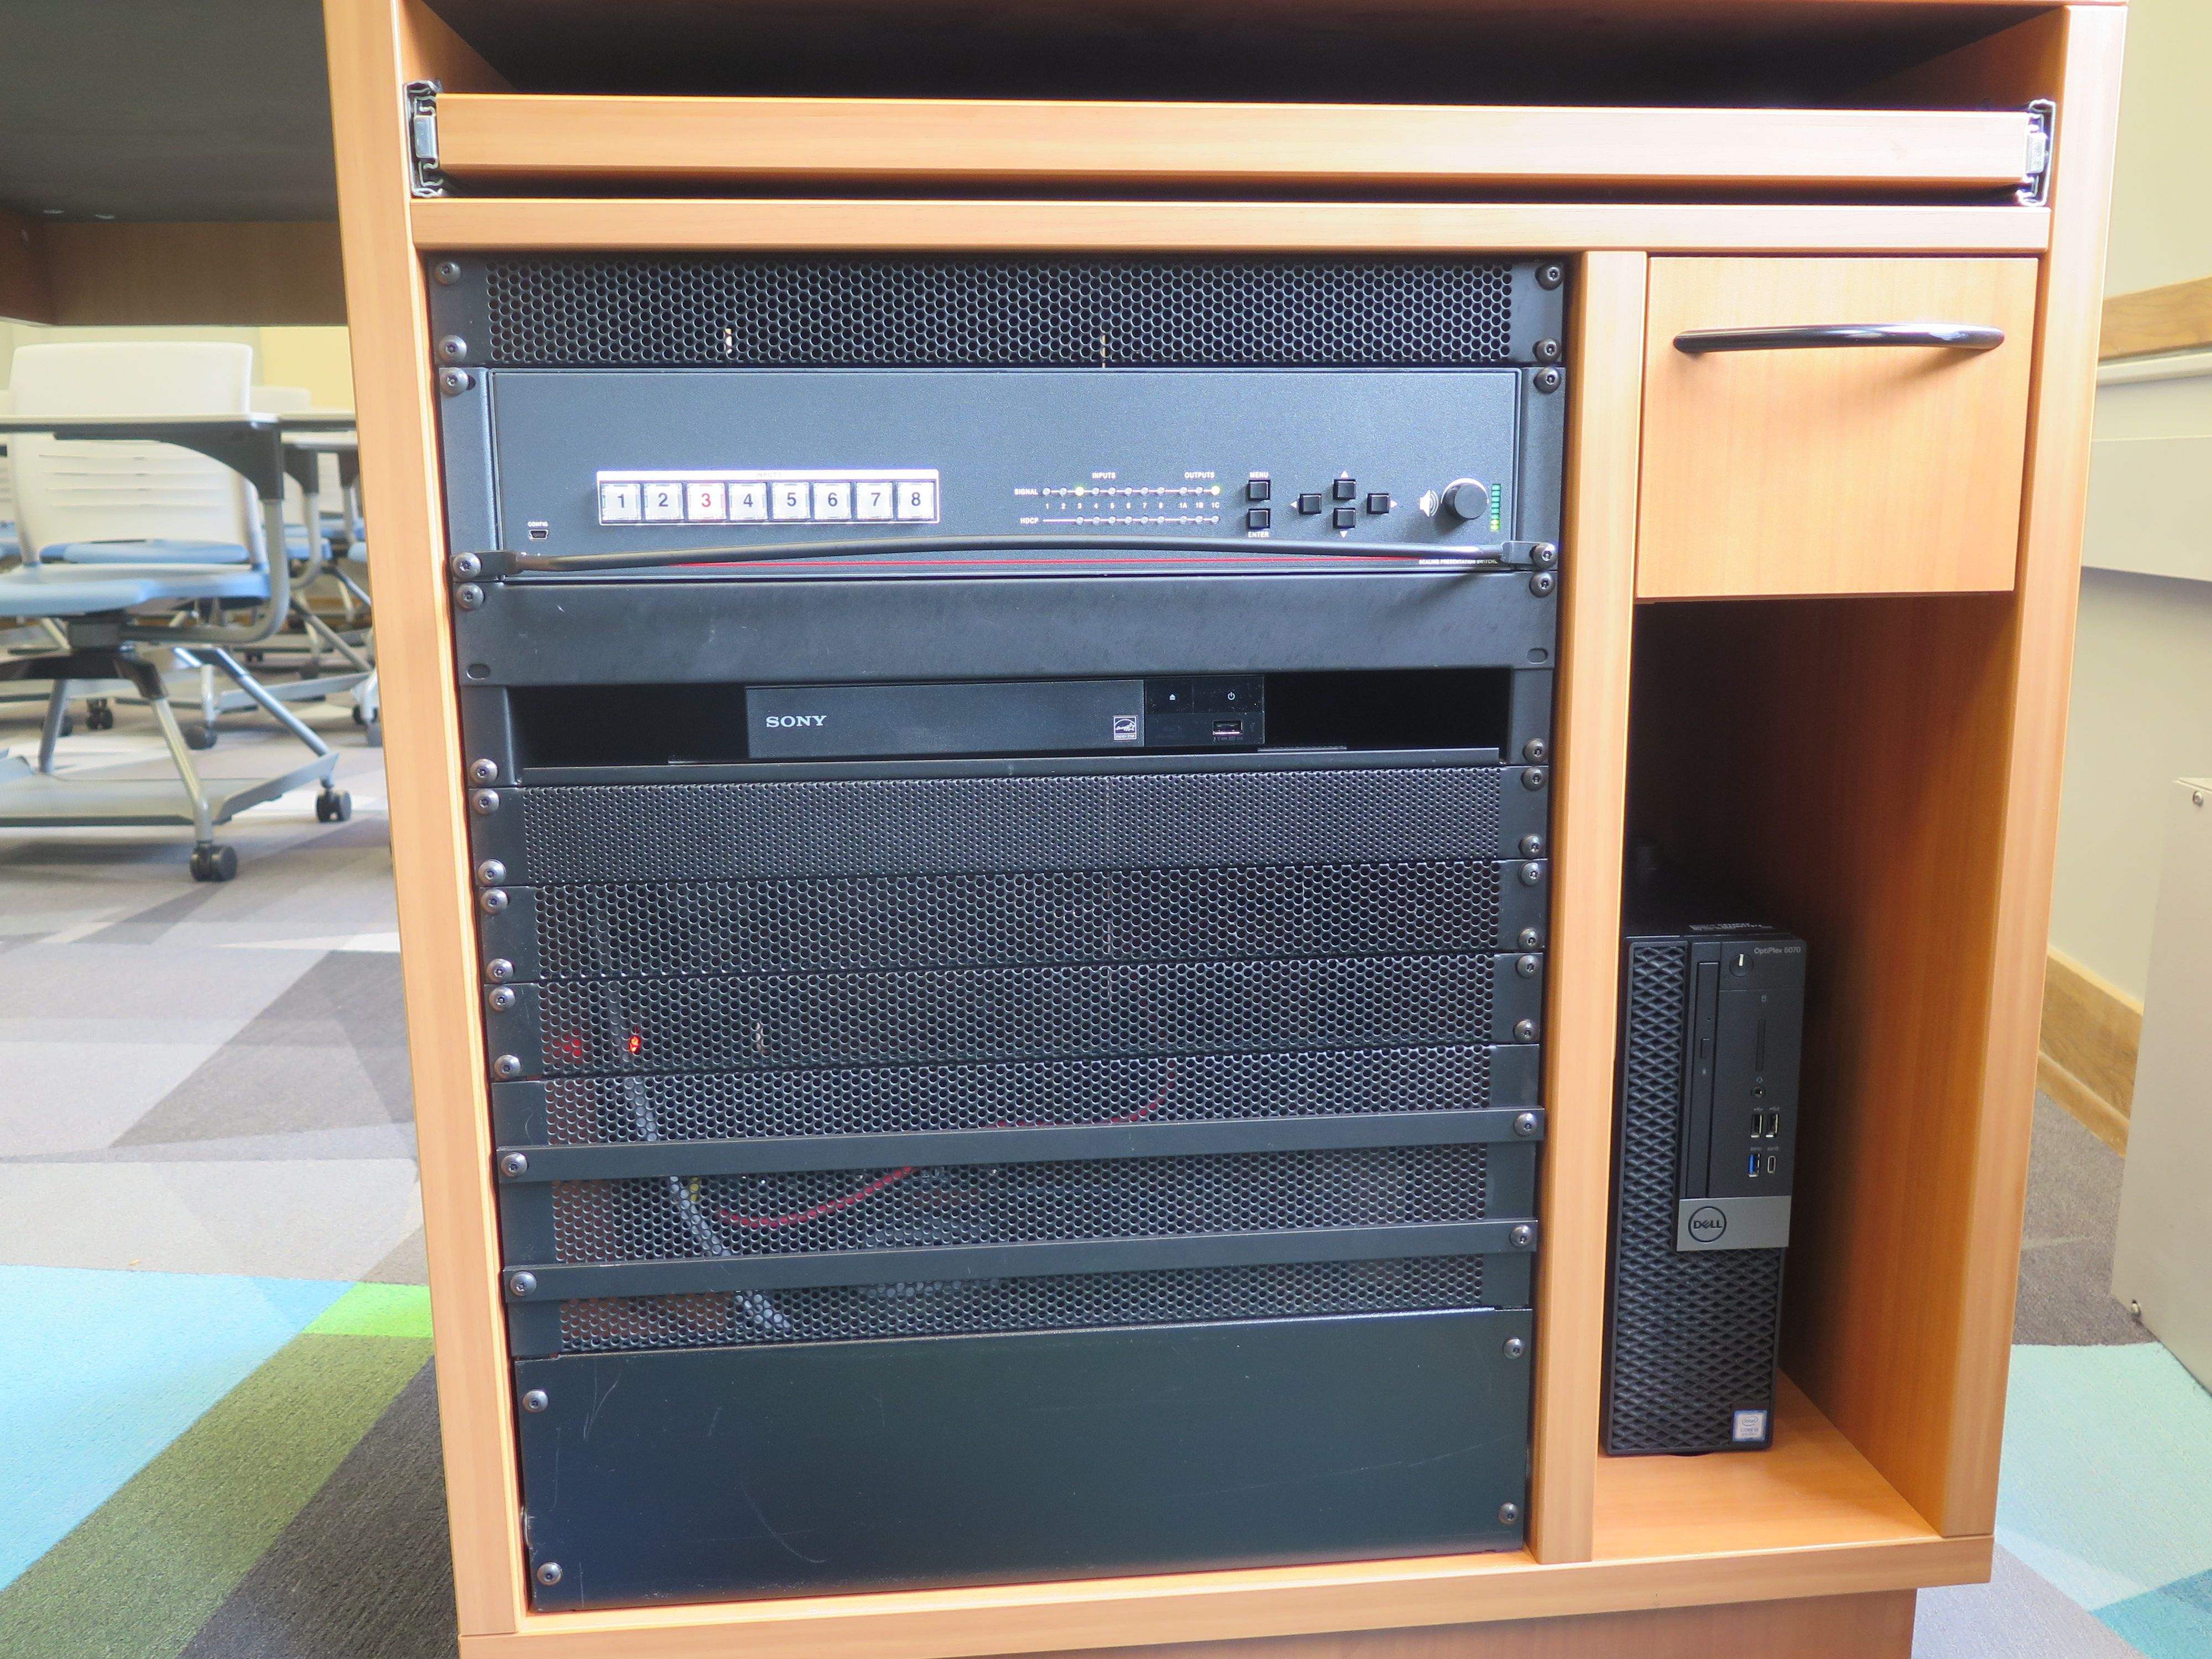 Front of Equipment rack showing a Blue-Ray/DVD Player, below that is the AV Switcher, and to the right is the compartment with the Dell Computer CPU.